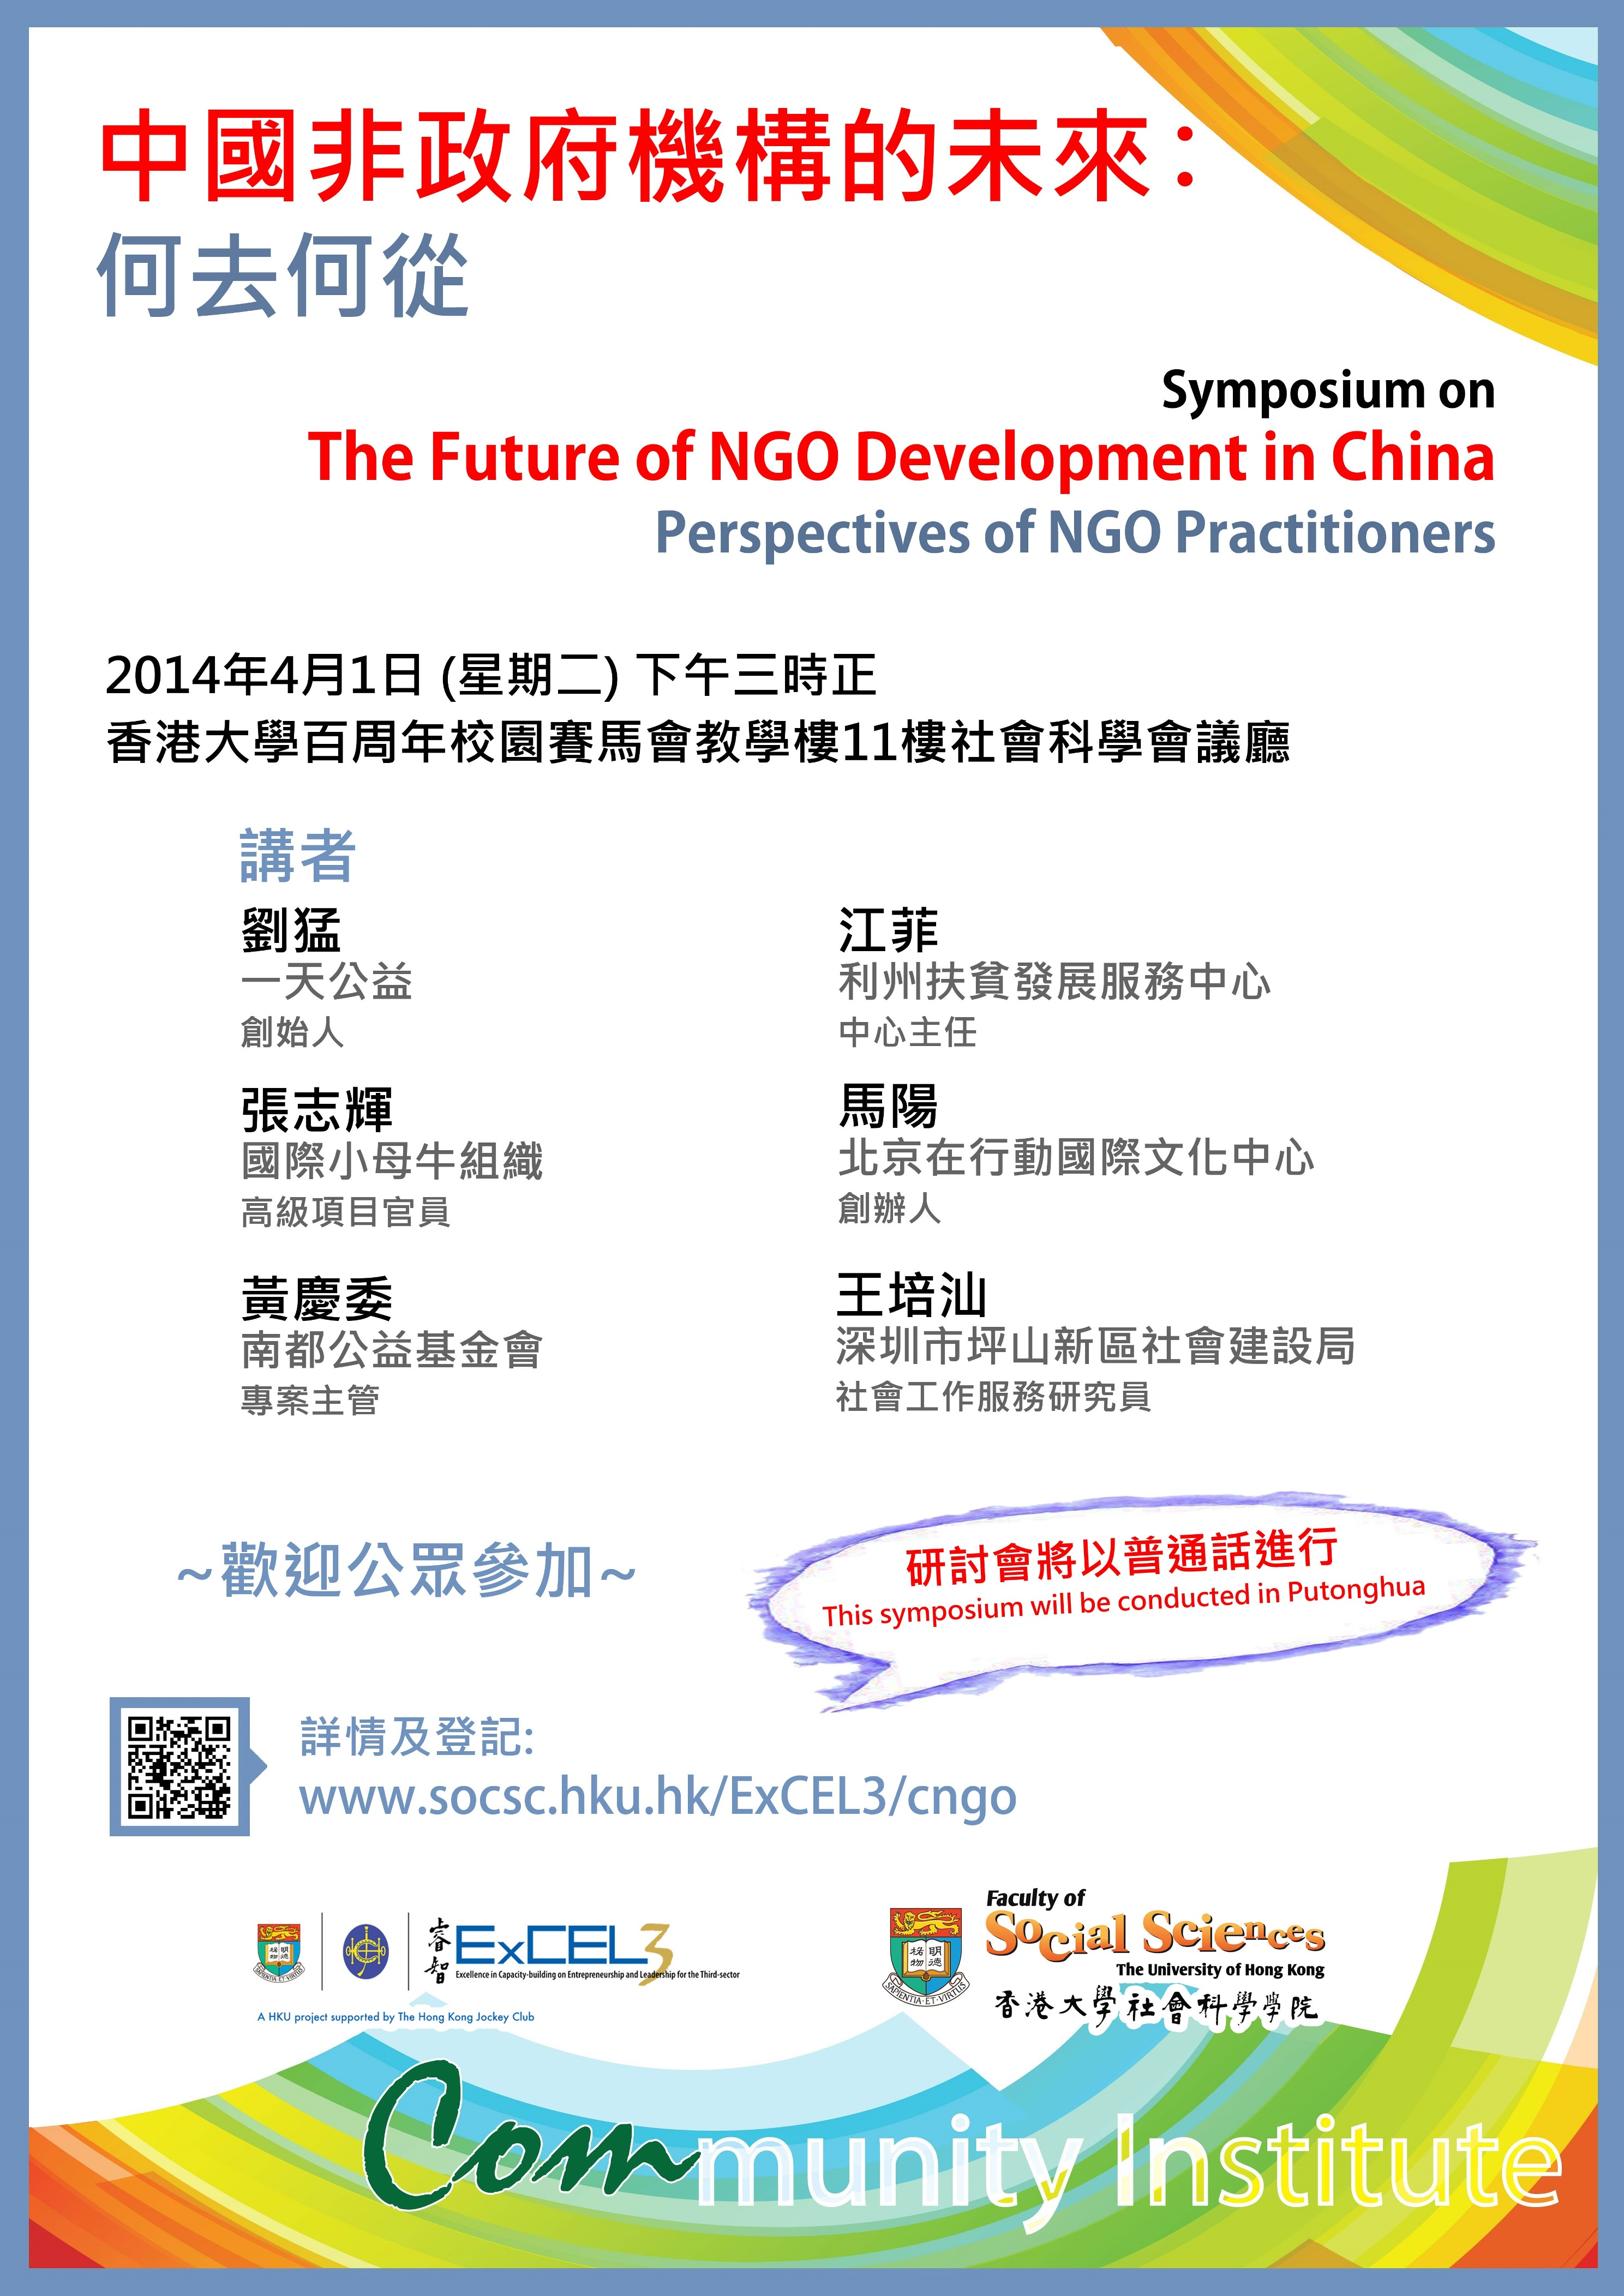 Symposium on the Future of NGO Development in China: Perspectives of NGO Practitioners